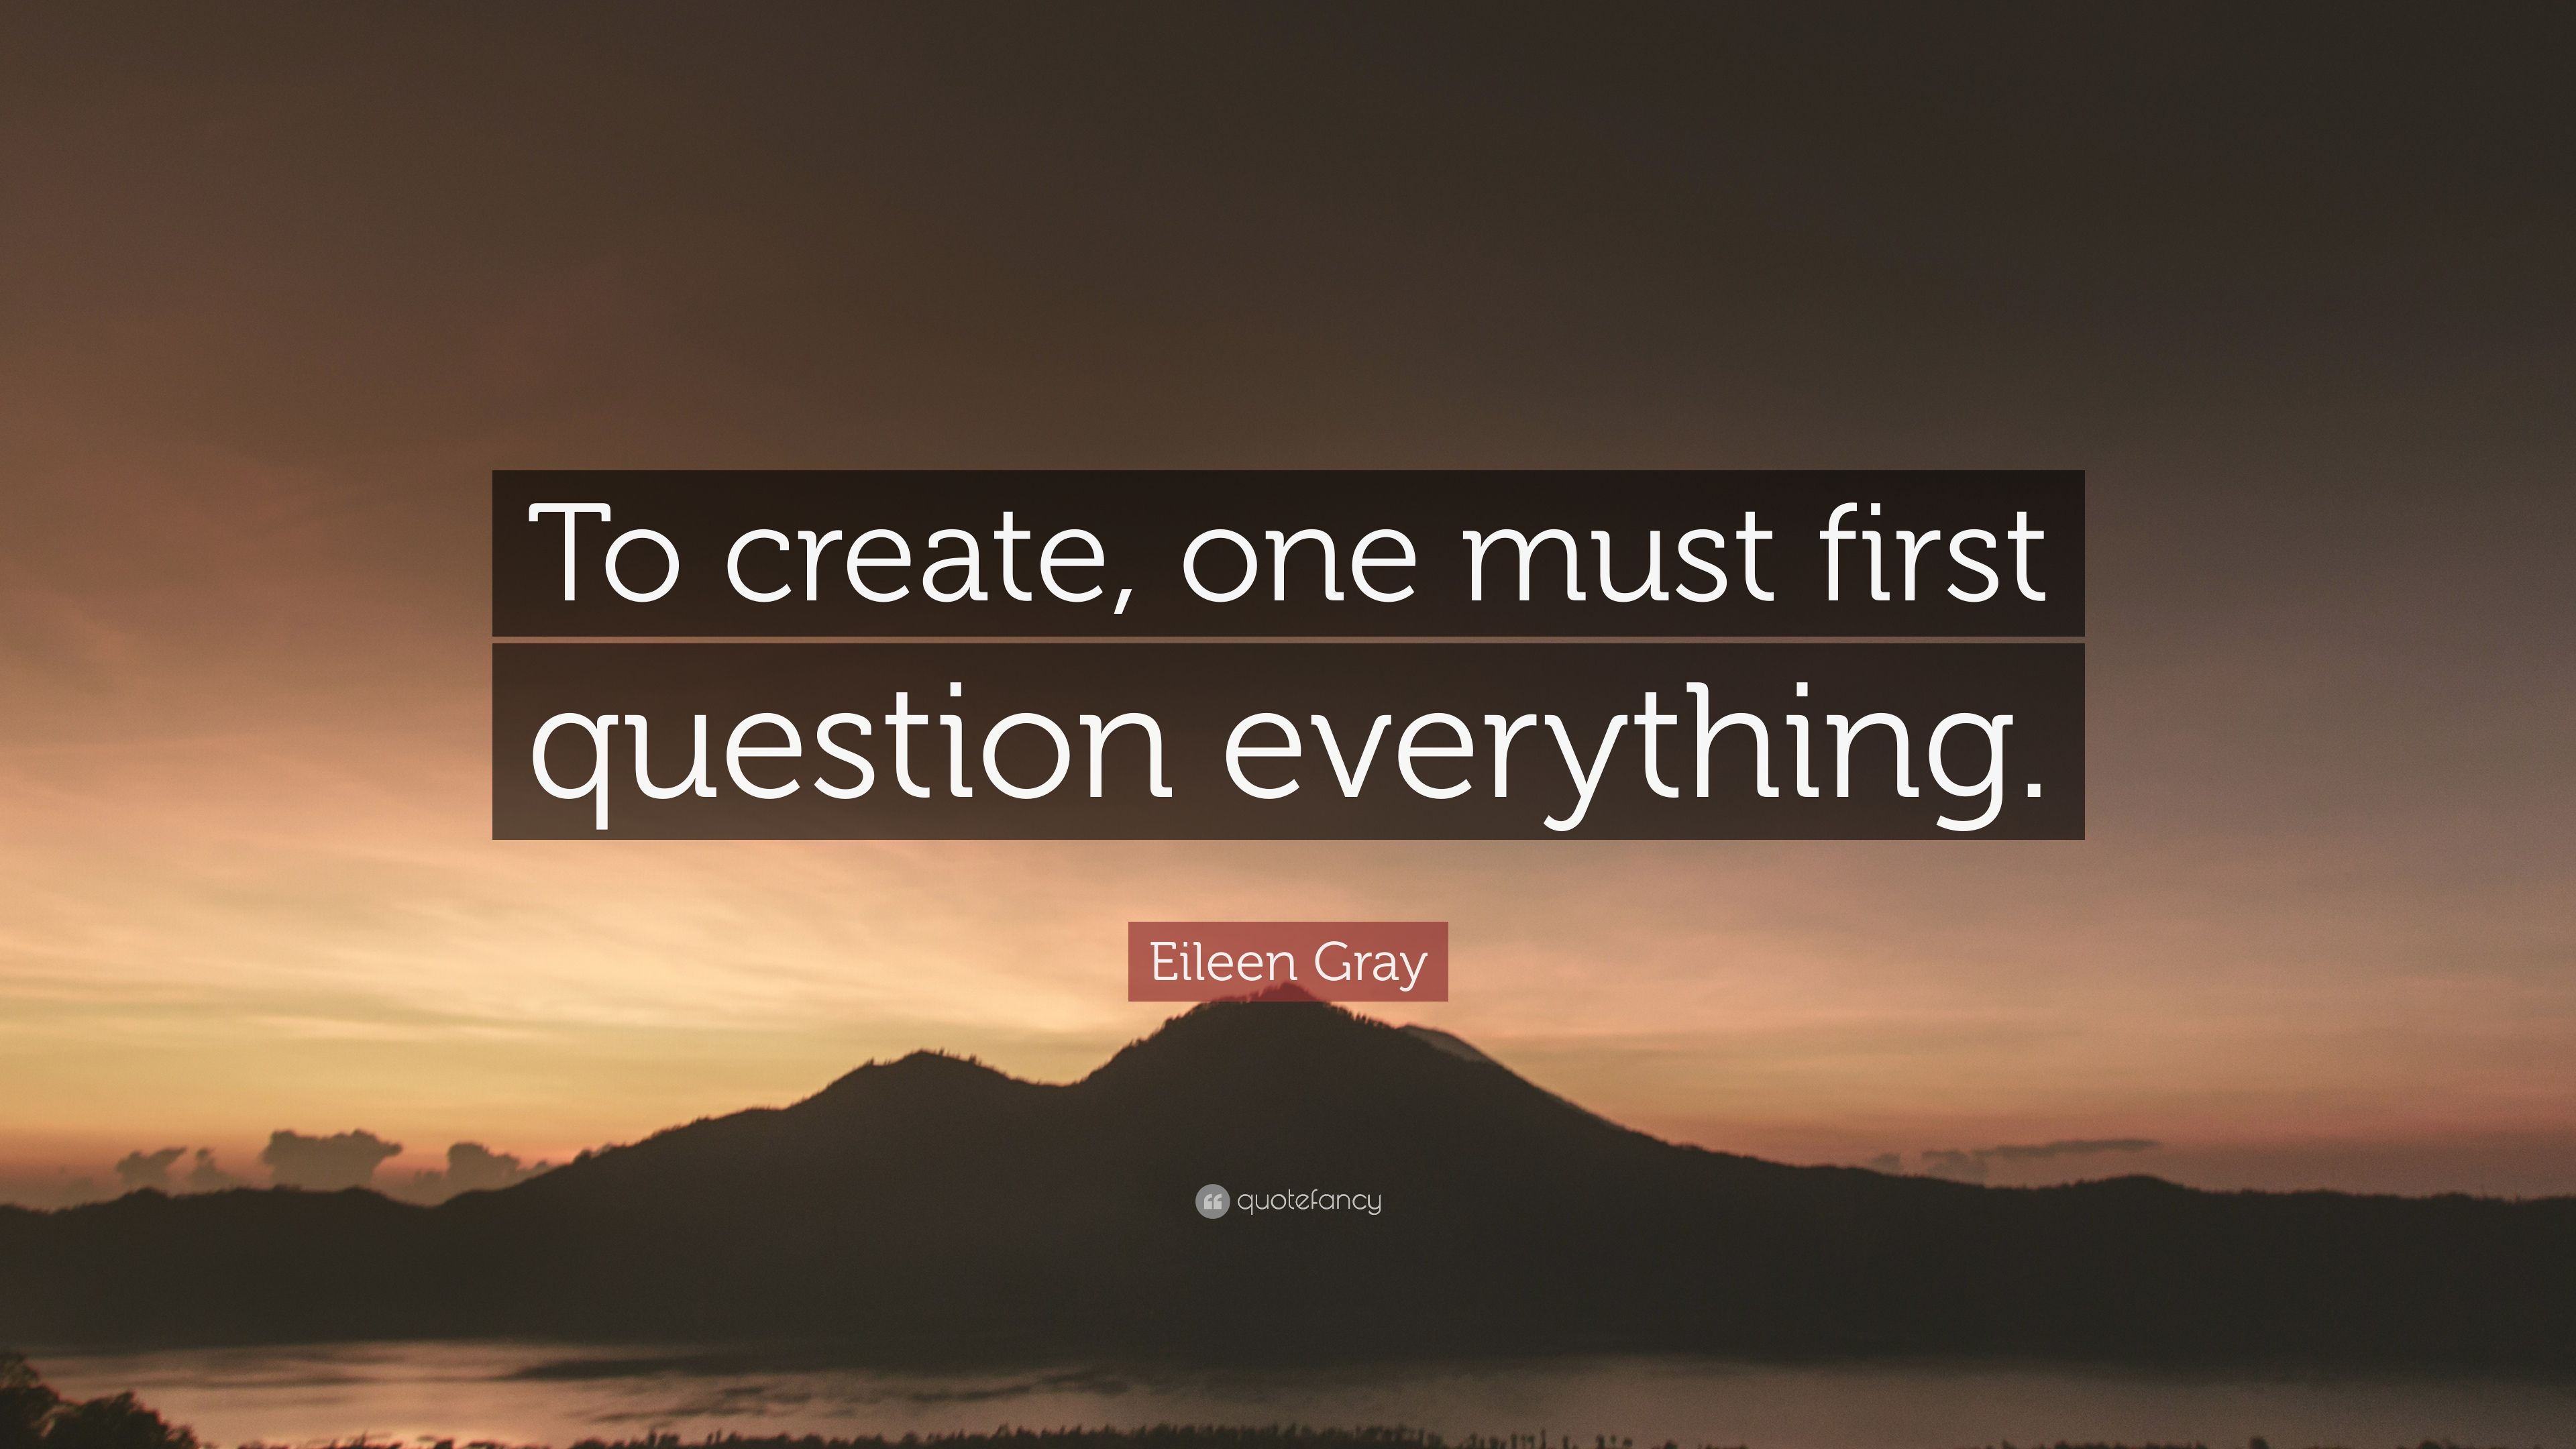 Eileen Gray Quote: “To create, one must first question everything.” (7 wallpaper)